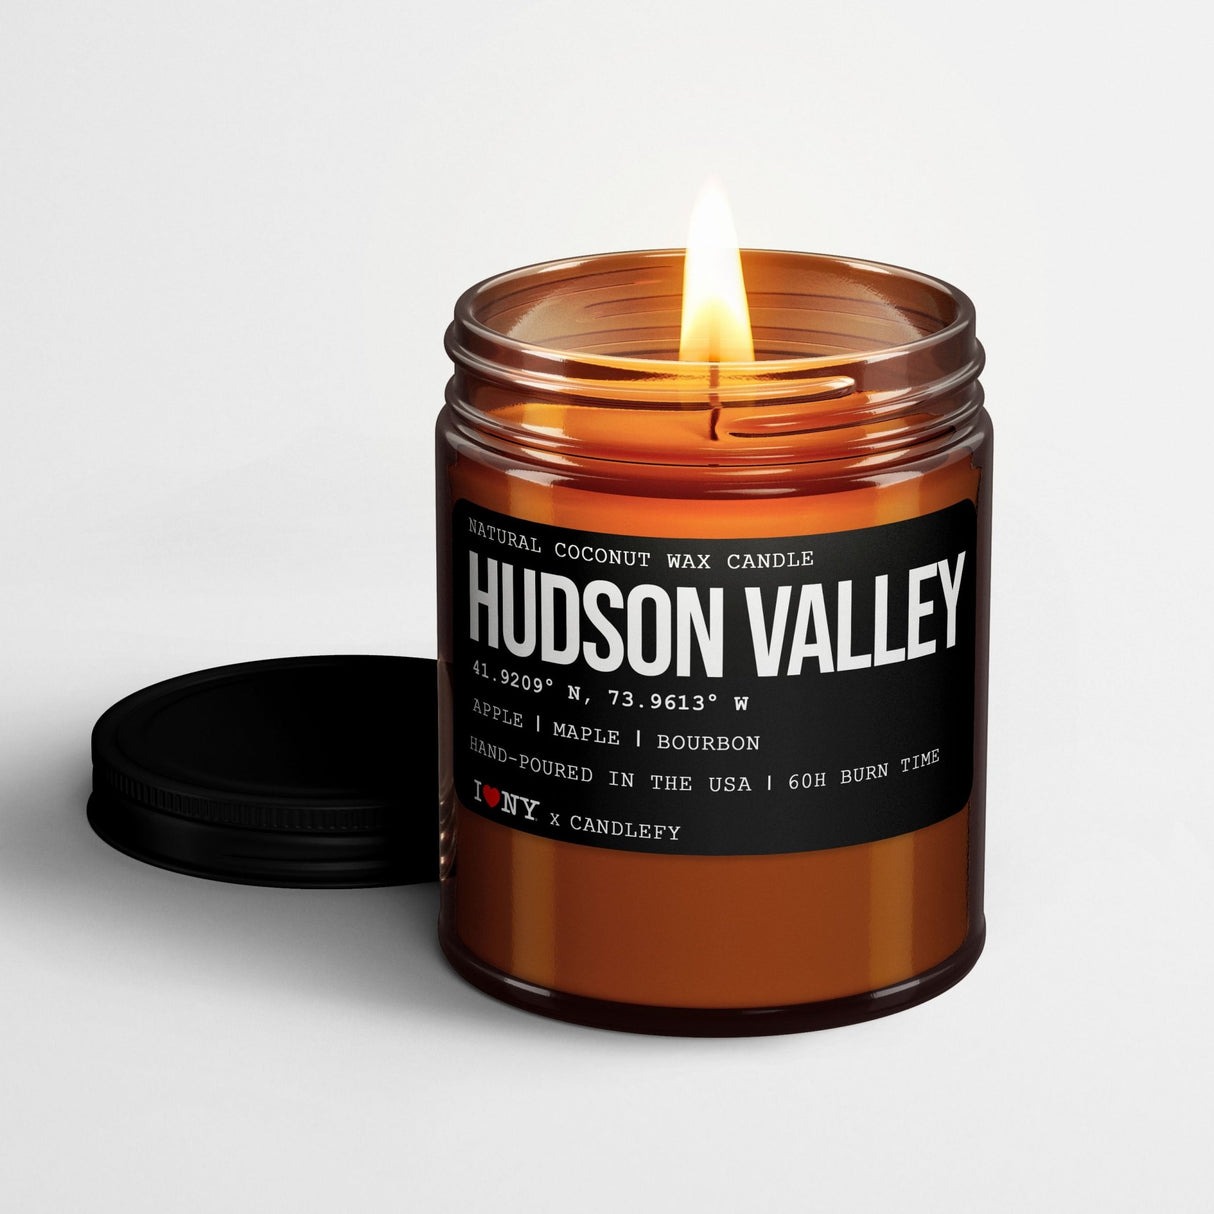 Hudson Valley: New York Scented Candle (Apple, Maple, Bourbon) - Candlefy